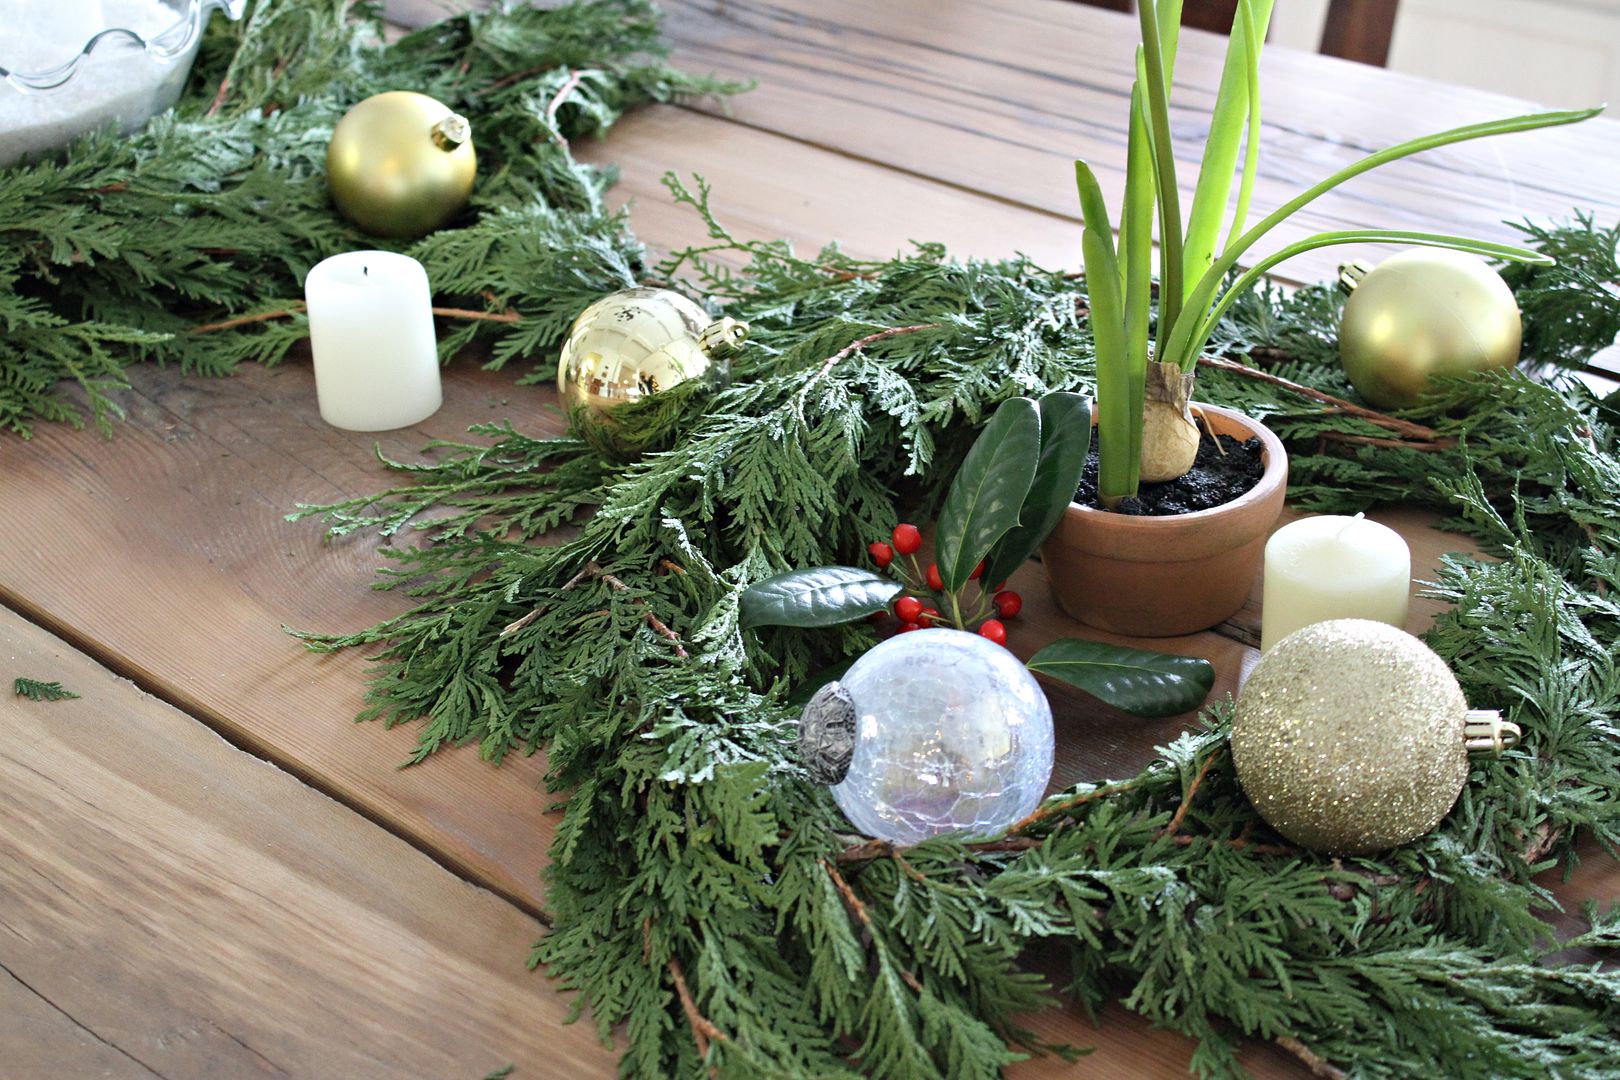 christmas decorating ideas on perfectly imperfect blog.